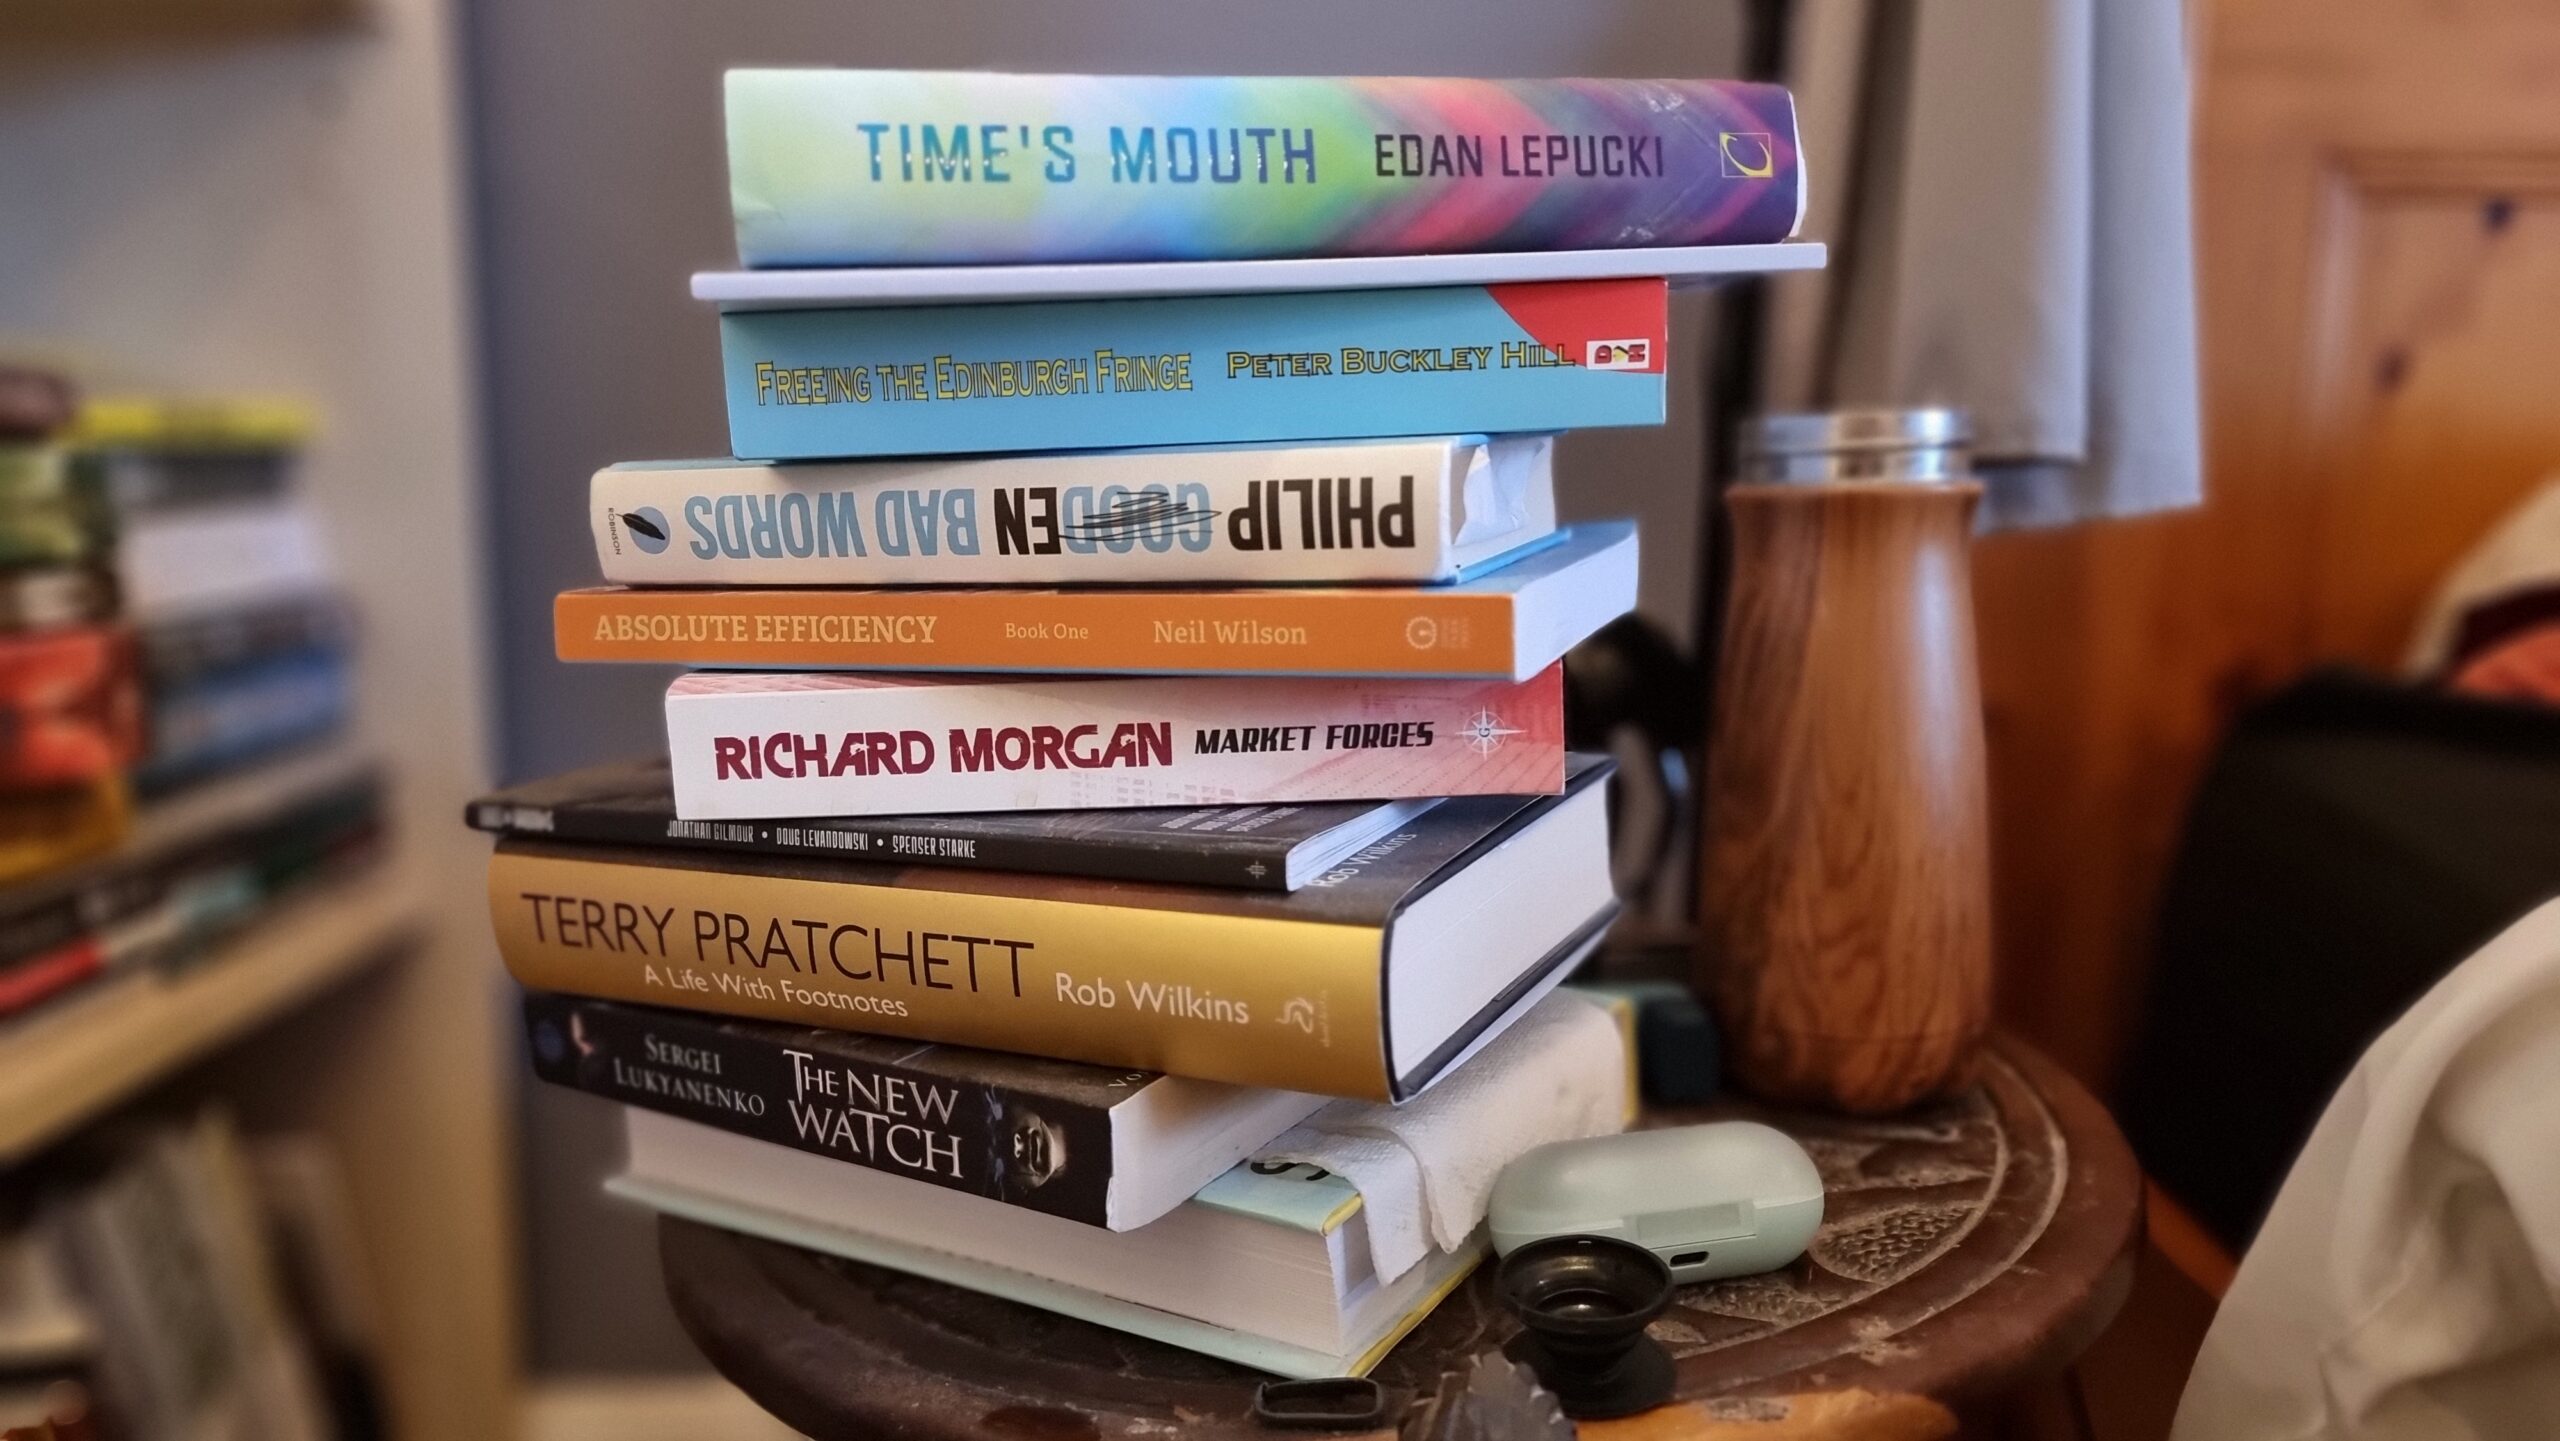 A pile of books on a round-topped wooden bedside table. From top to bottom: Time's Mouth by Edan Lepucki, a slim book whose spine doesn't show a name, Bad Words by Philip Gooden, Absolute Efficiency: Book One by Neil Wilson, Market Forces by Richard Morgan, Kids on Brooms by Jonathan Gilmour, Doug Levandowski, and Spenser Starke, Terry Pratchett: A Life With Footnotes by Rob Wilkins, The New Watch by Sergei Lukyanenko, and a book whose spine is turned away from the camera.